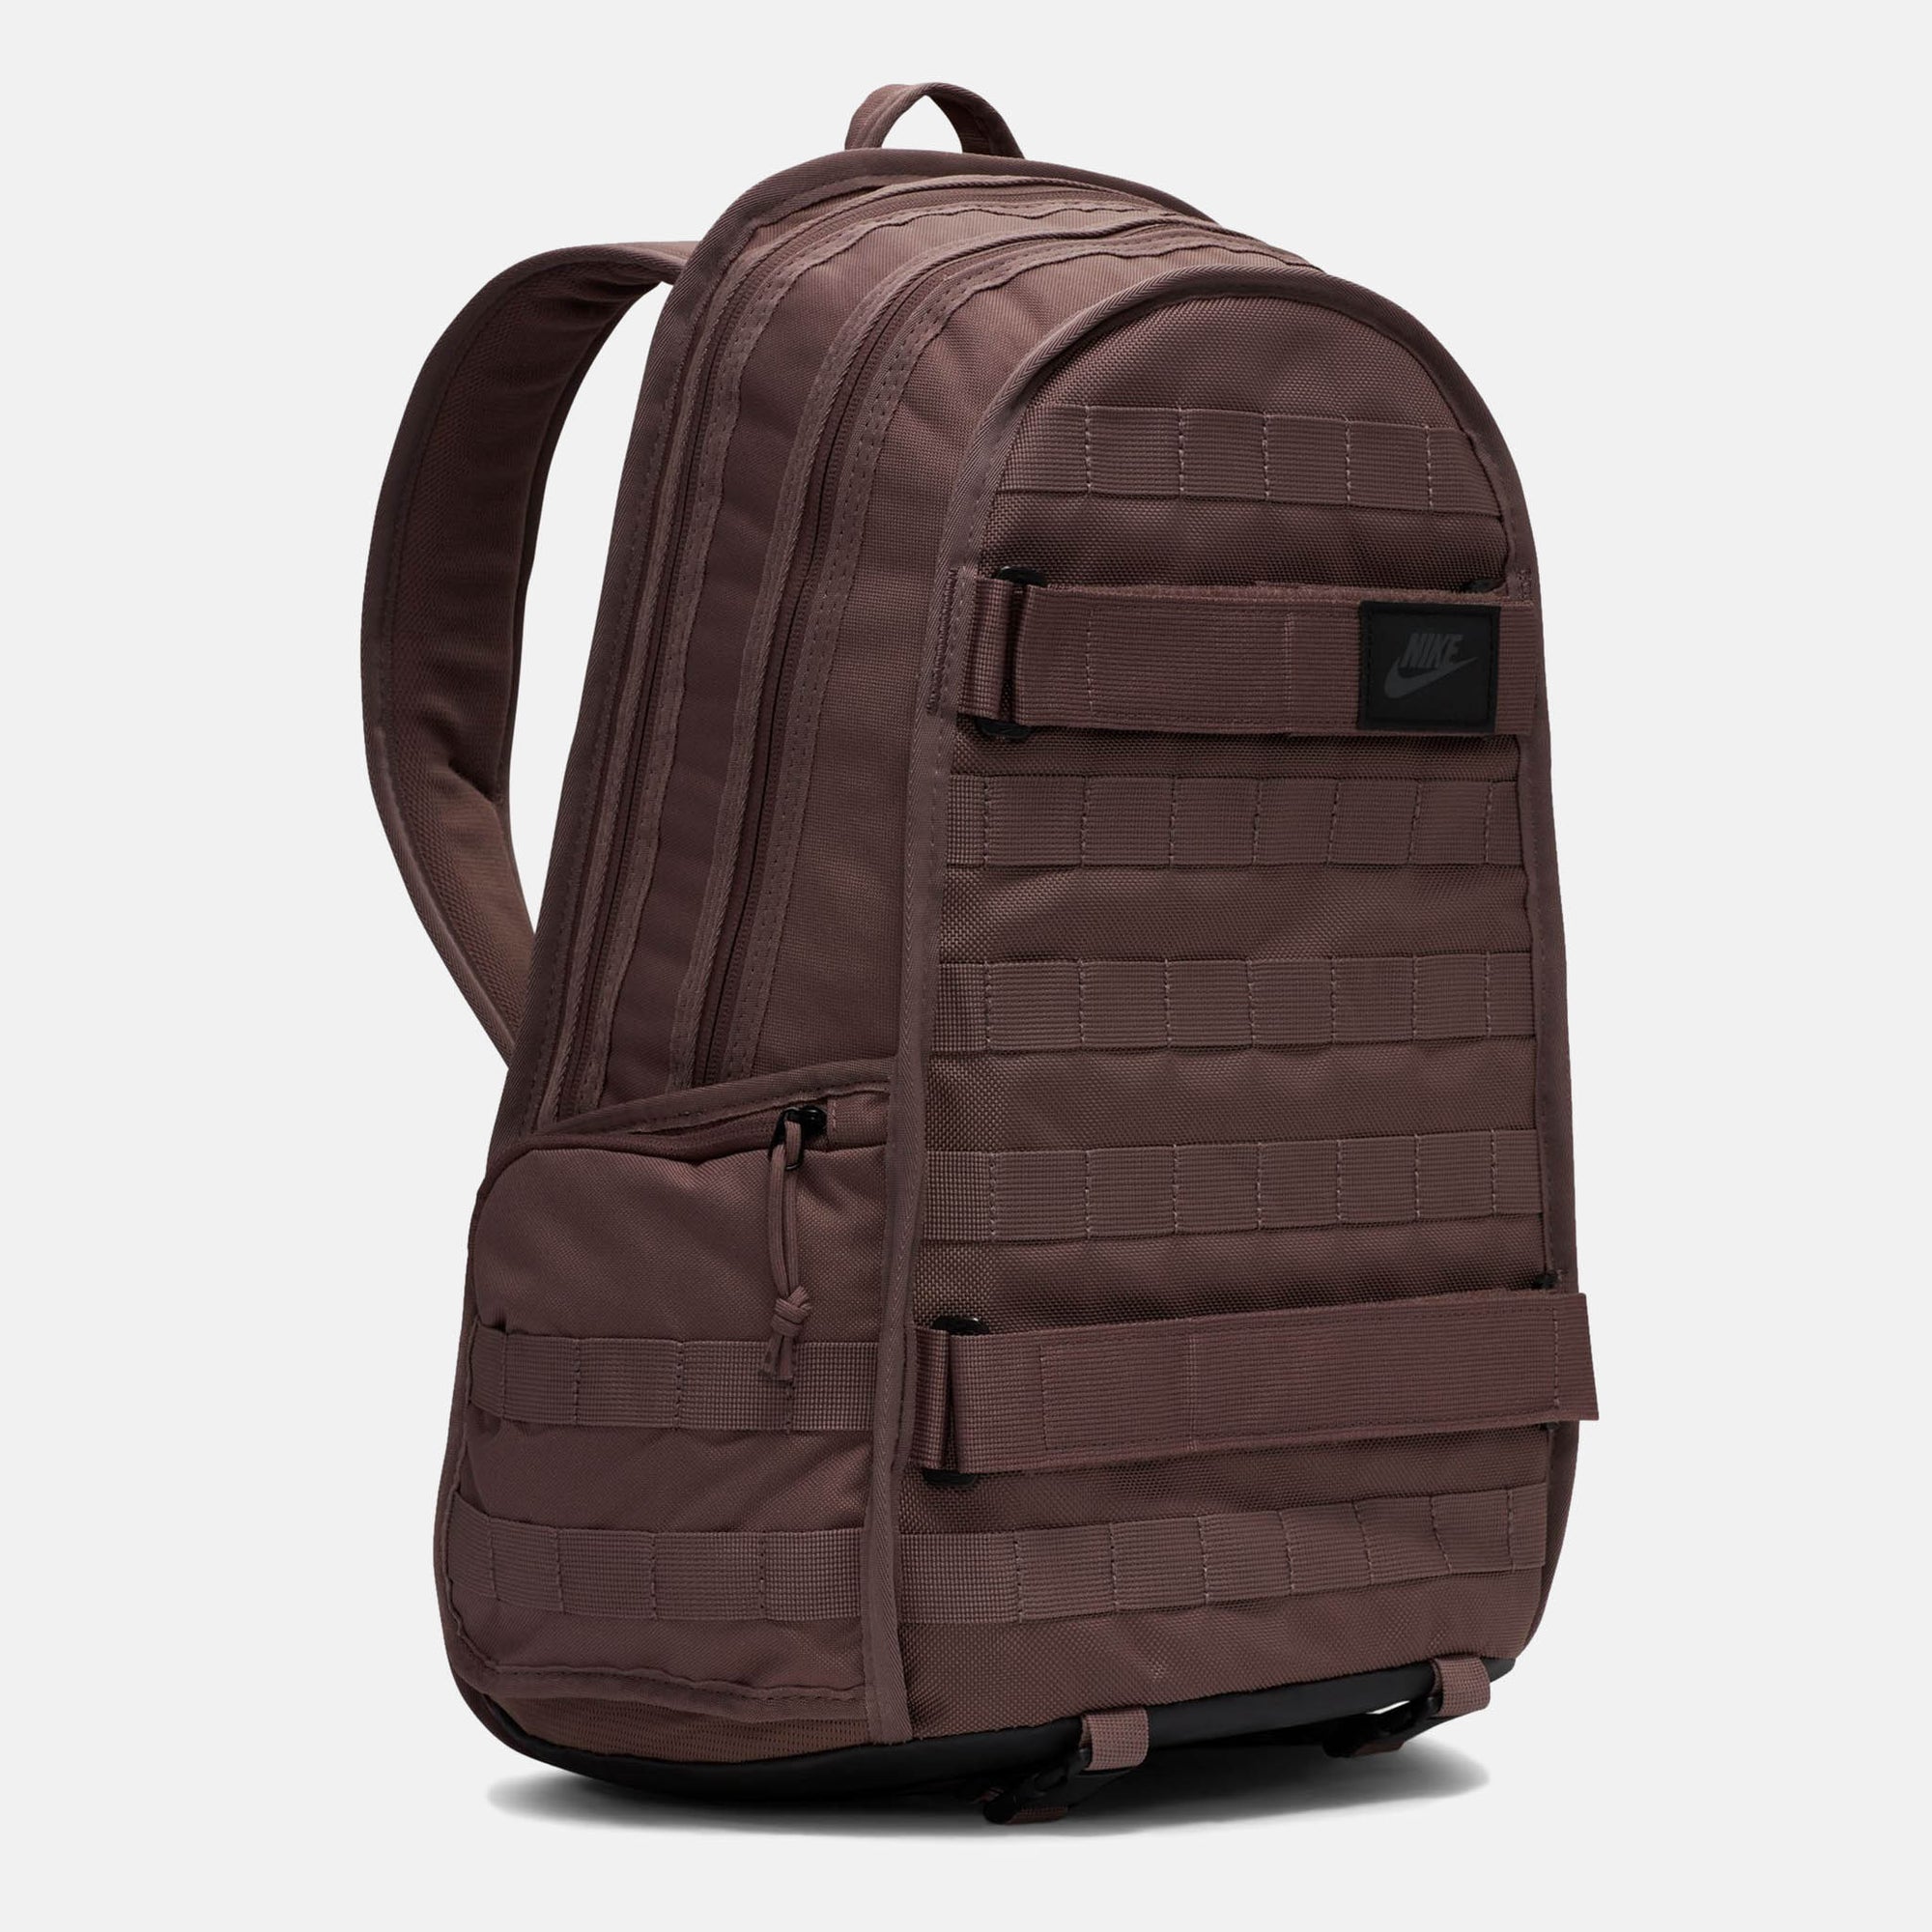 Nike SB - RPM Backpack - Plum Eclipse / Anthracite